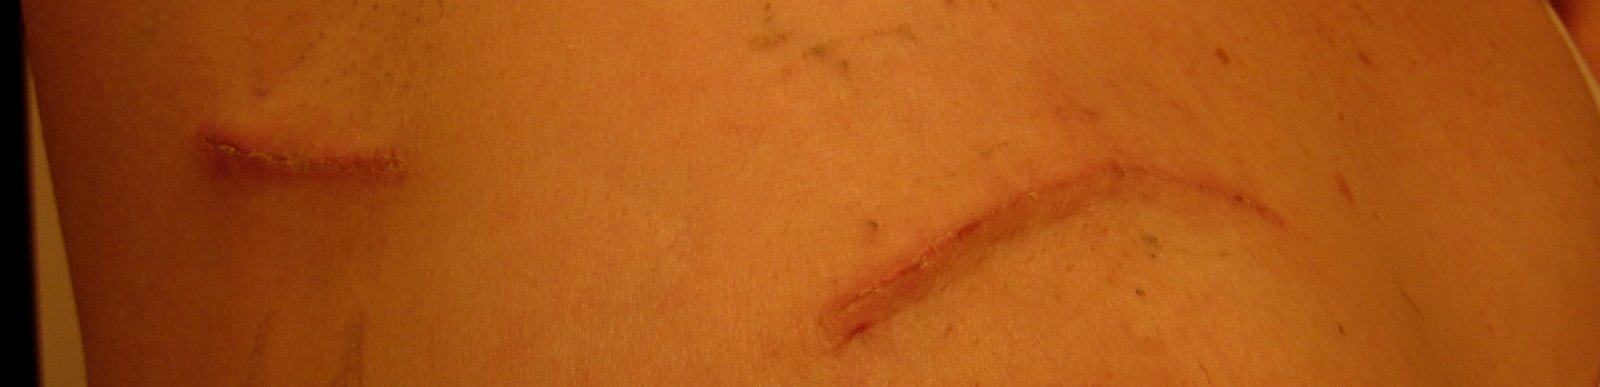 [Scars+One+Week+After+Surgery.jpg]